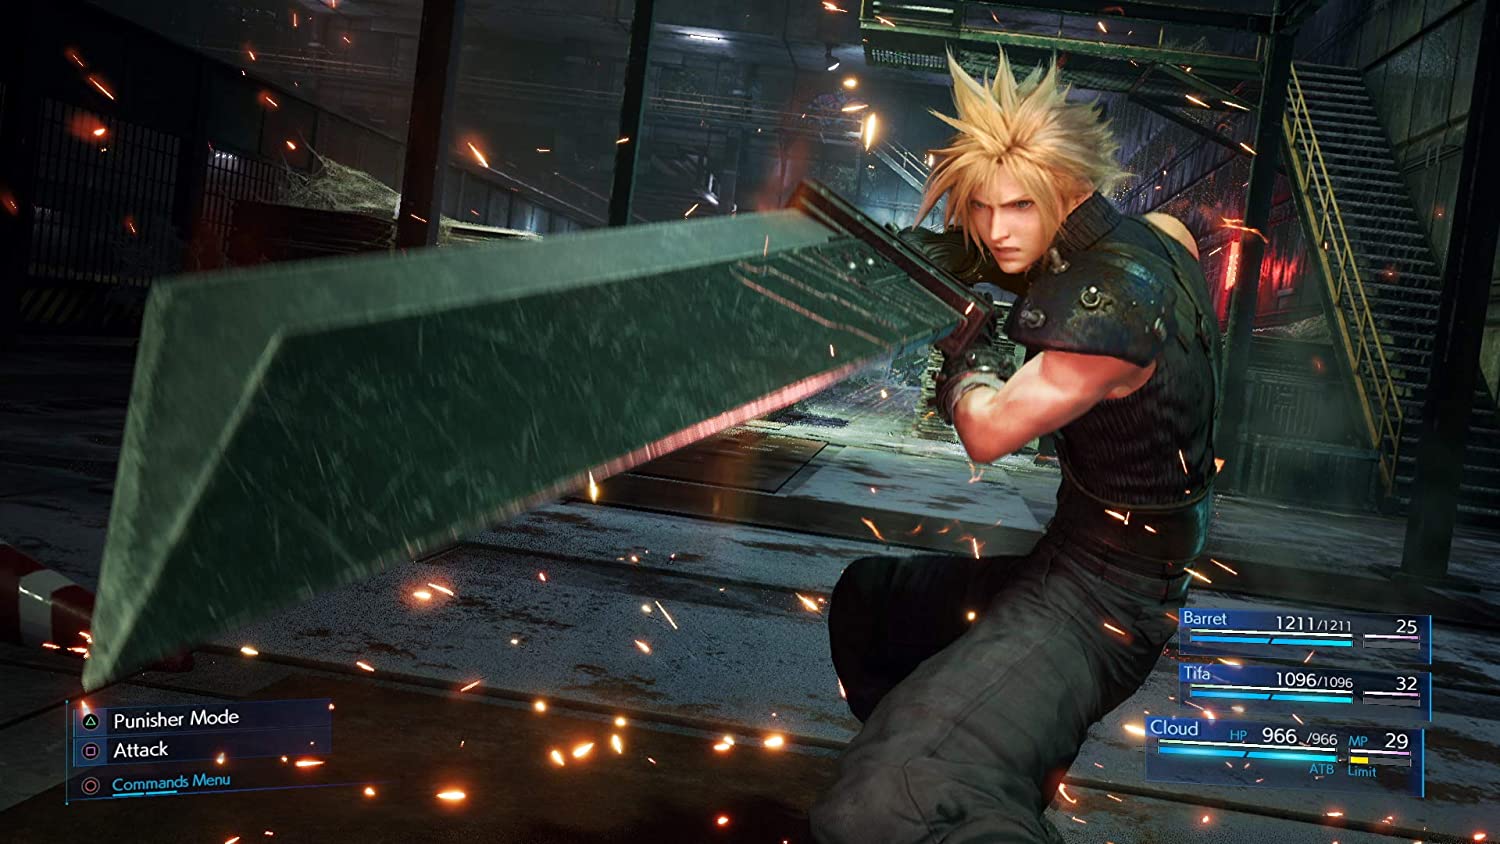 metacritic on X: The 40 Best Console-Exclusive Games of This Generation:   #30 (tie): Final Fantasy VII Remake [87]   / X